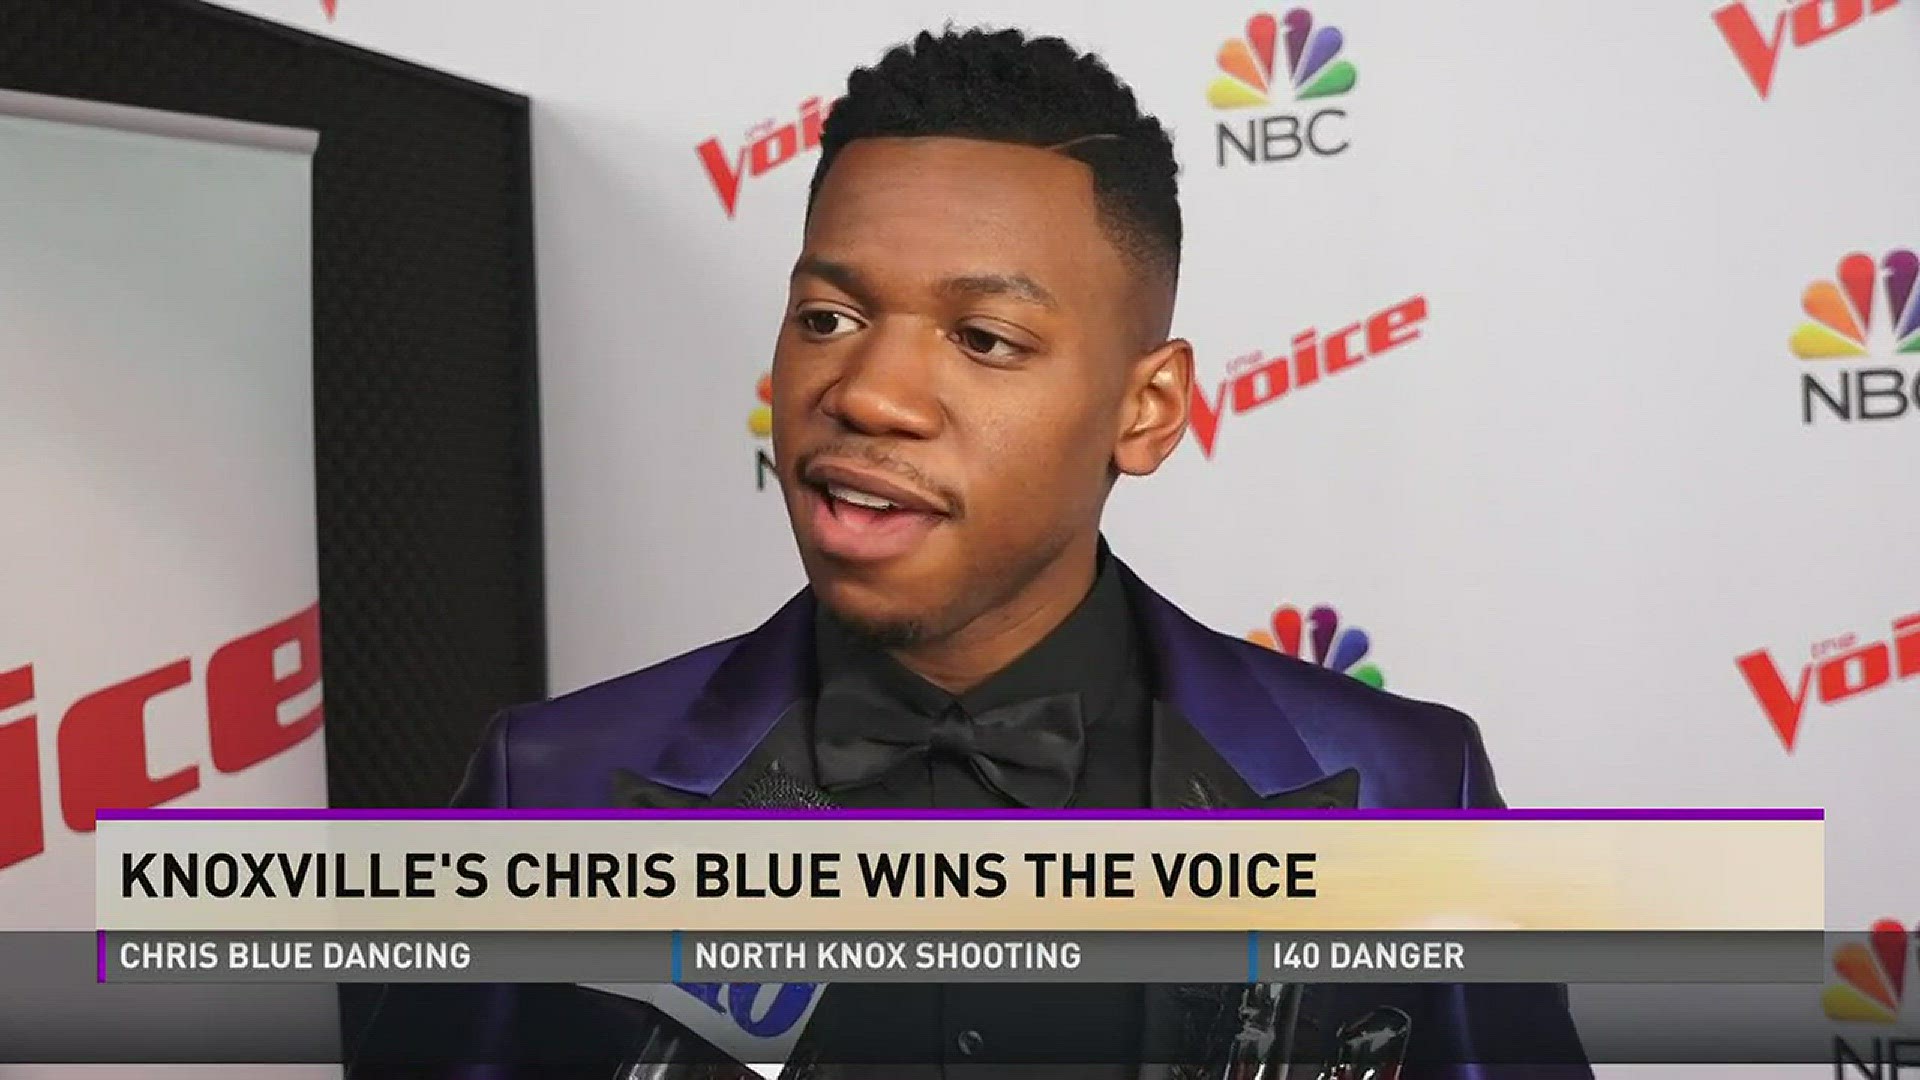 May 24, 2017: A look at the community support for Voice winner Chris Blue.